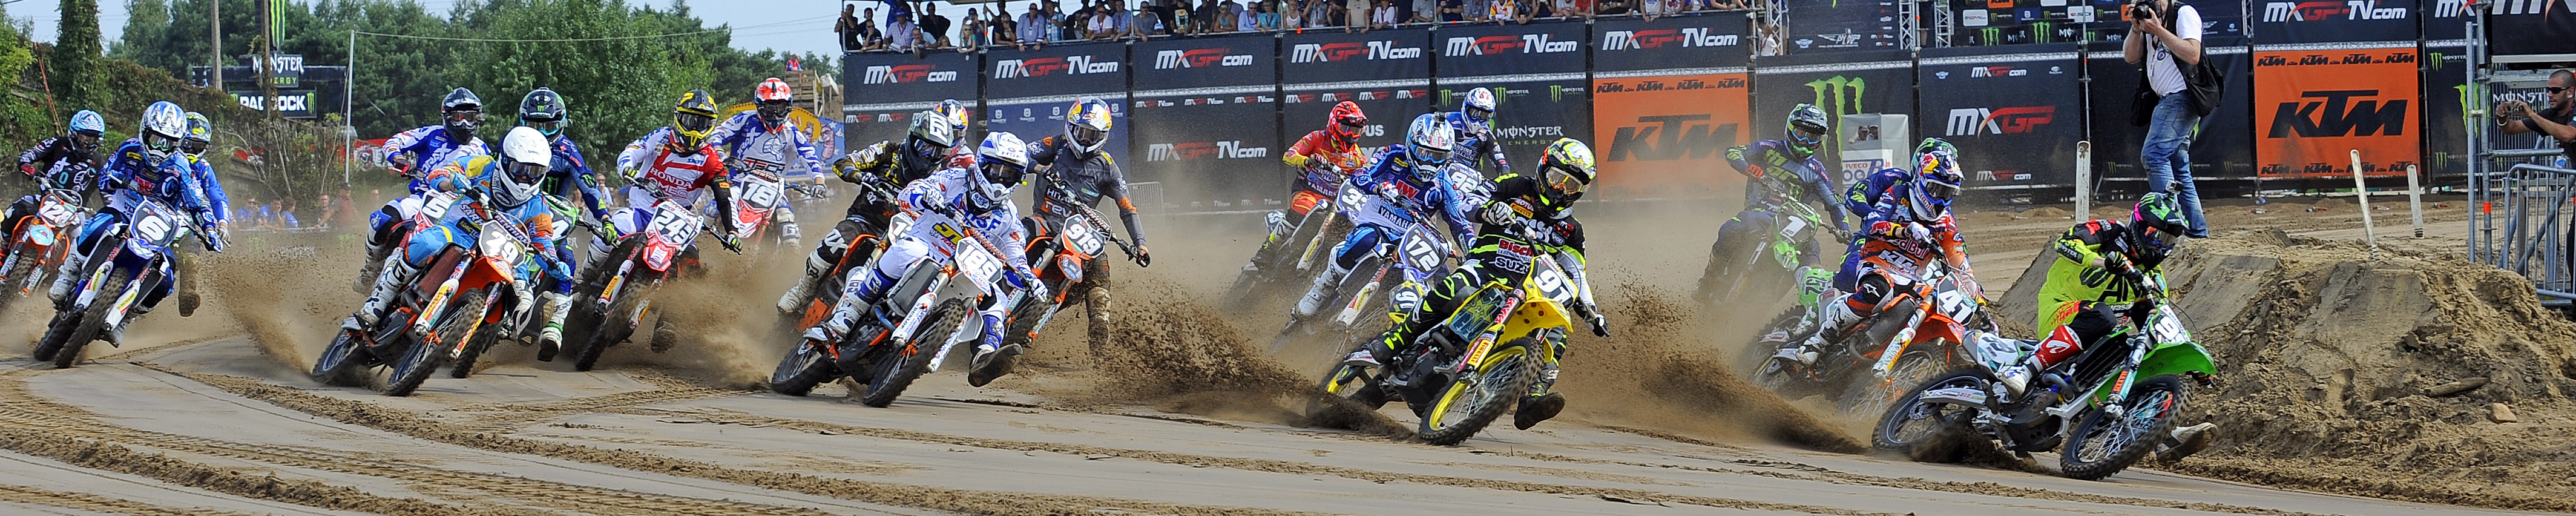 Maxxis and Anstie perfect at Lommel to take GP winning ‘doubles’